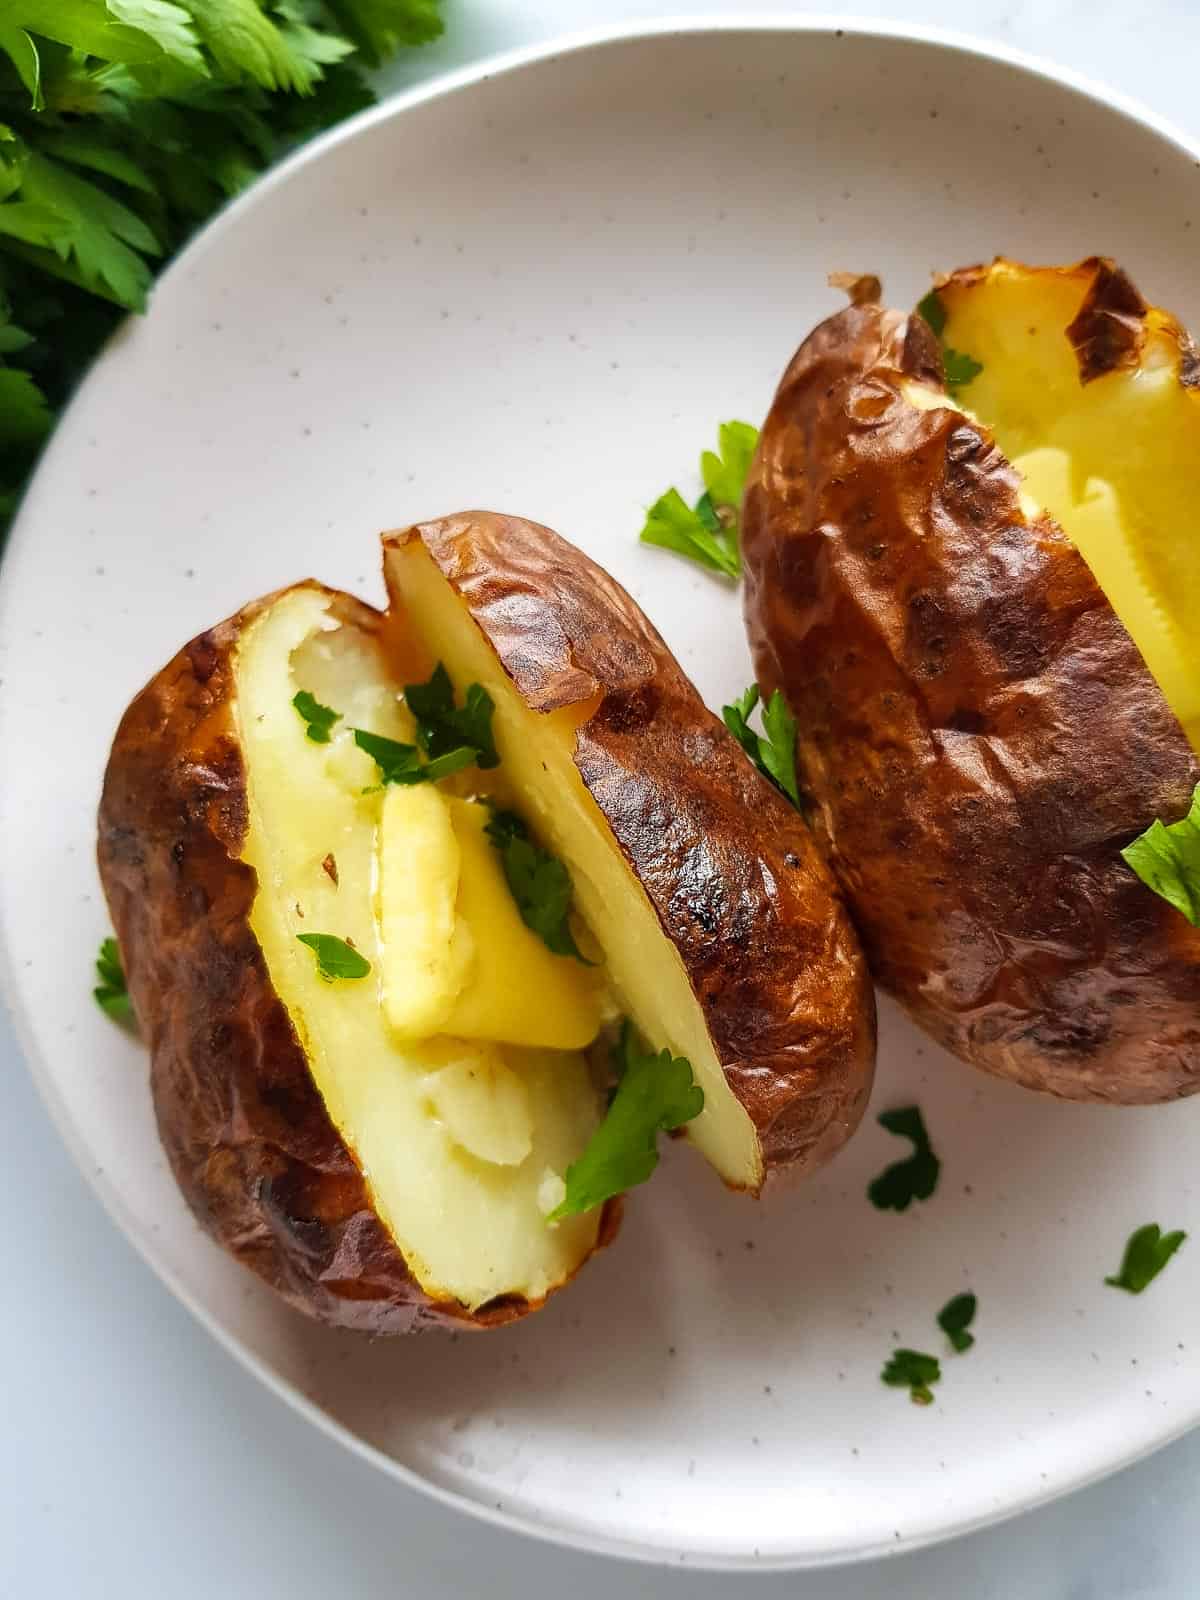 A baked potato with butter and parsley on a plate.